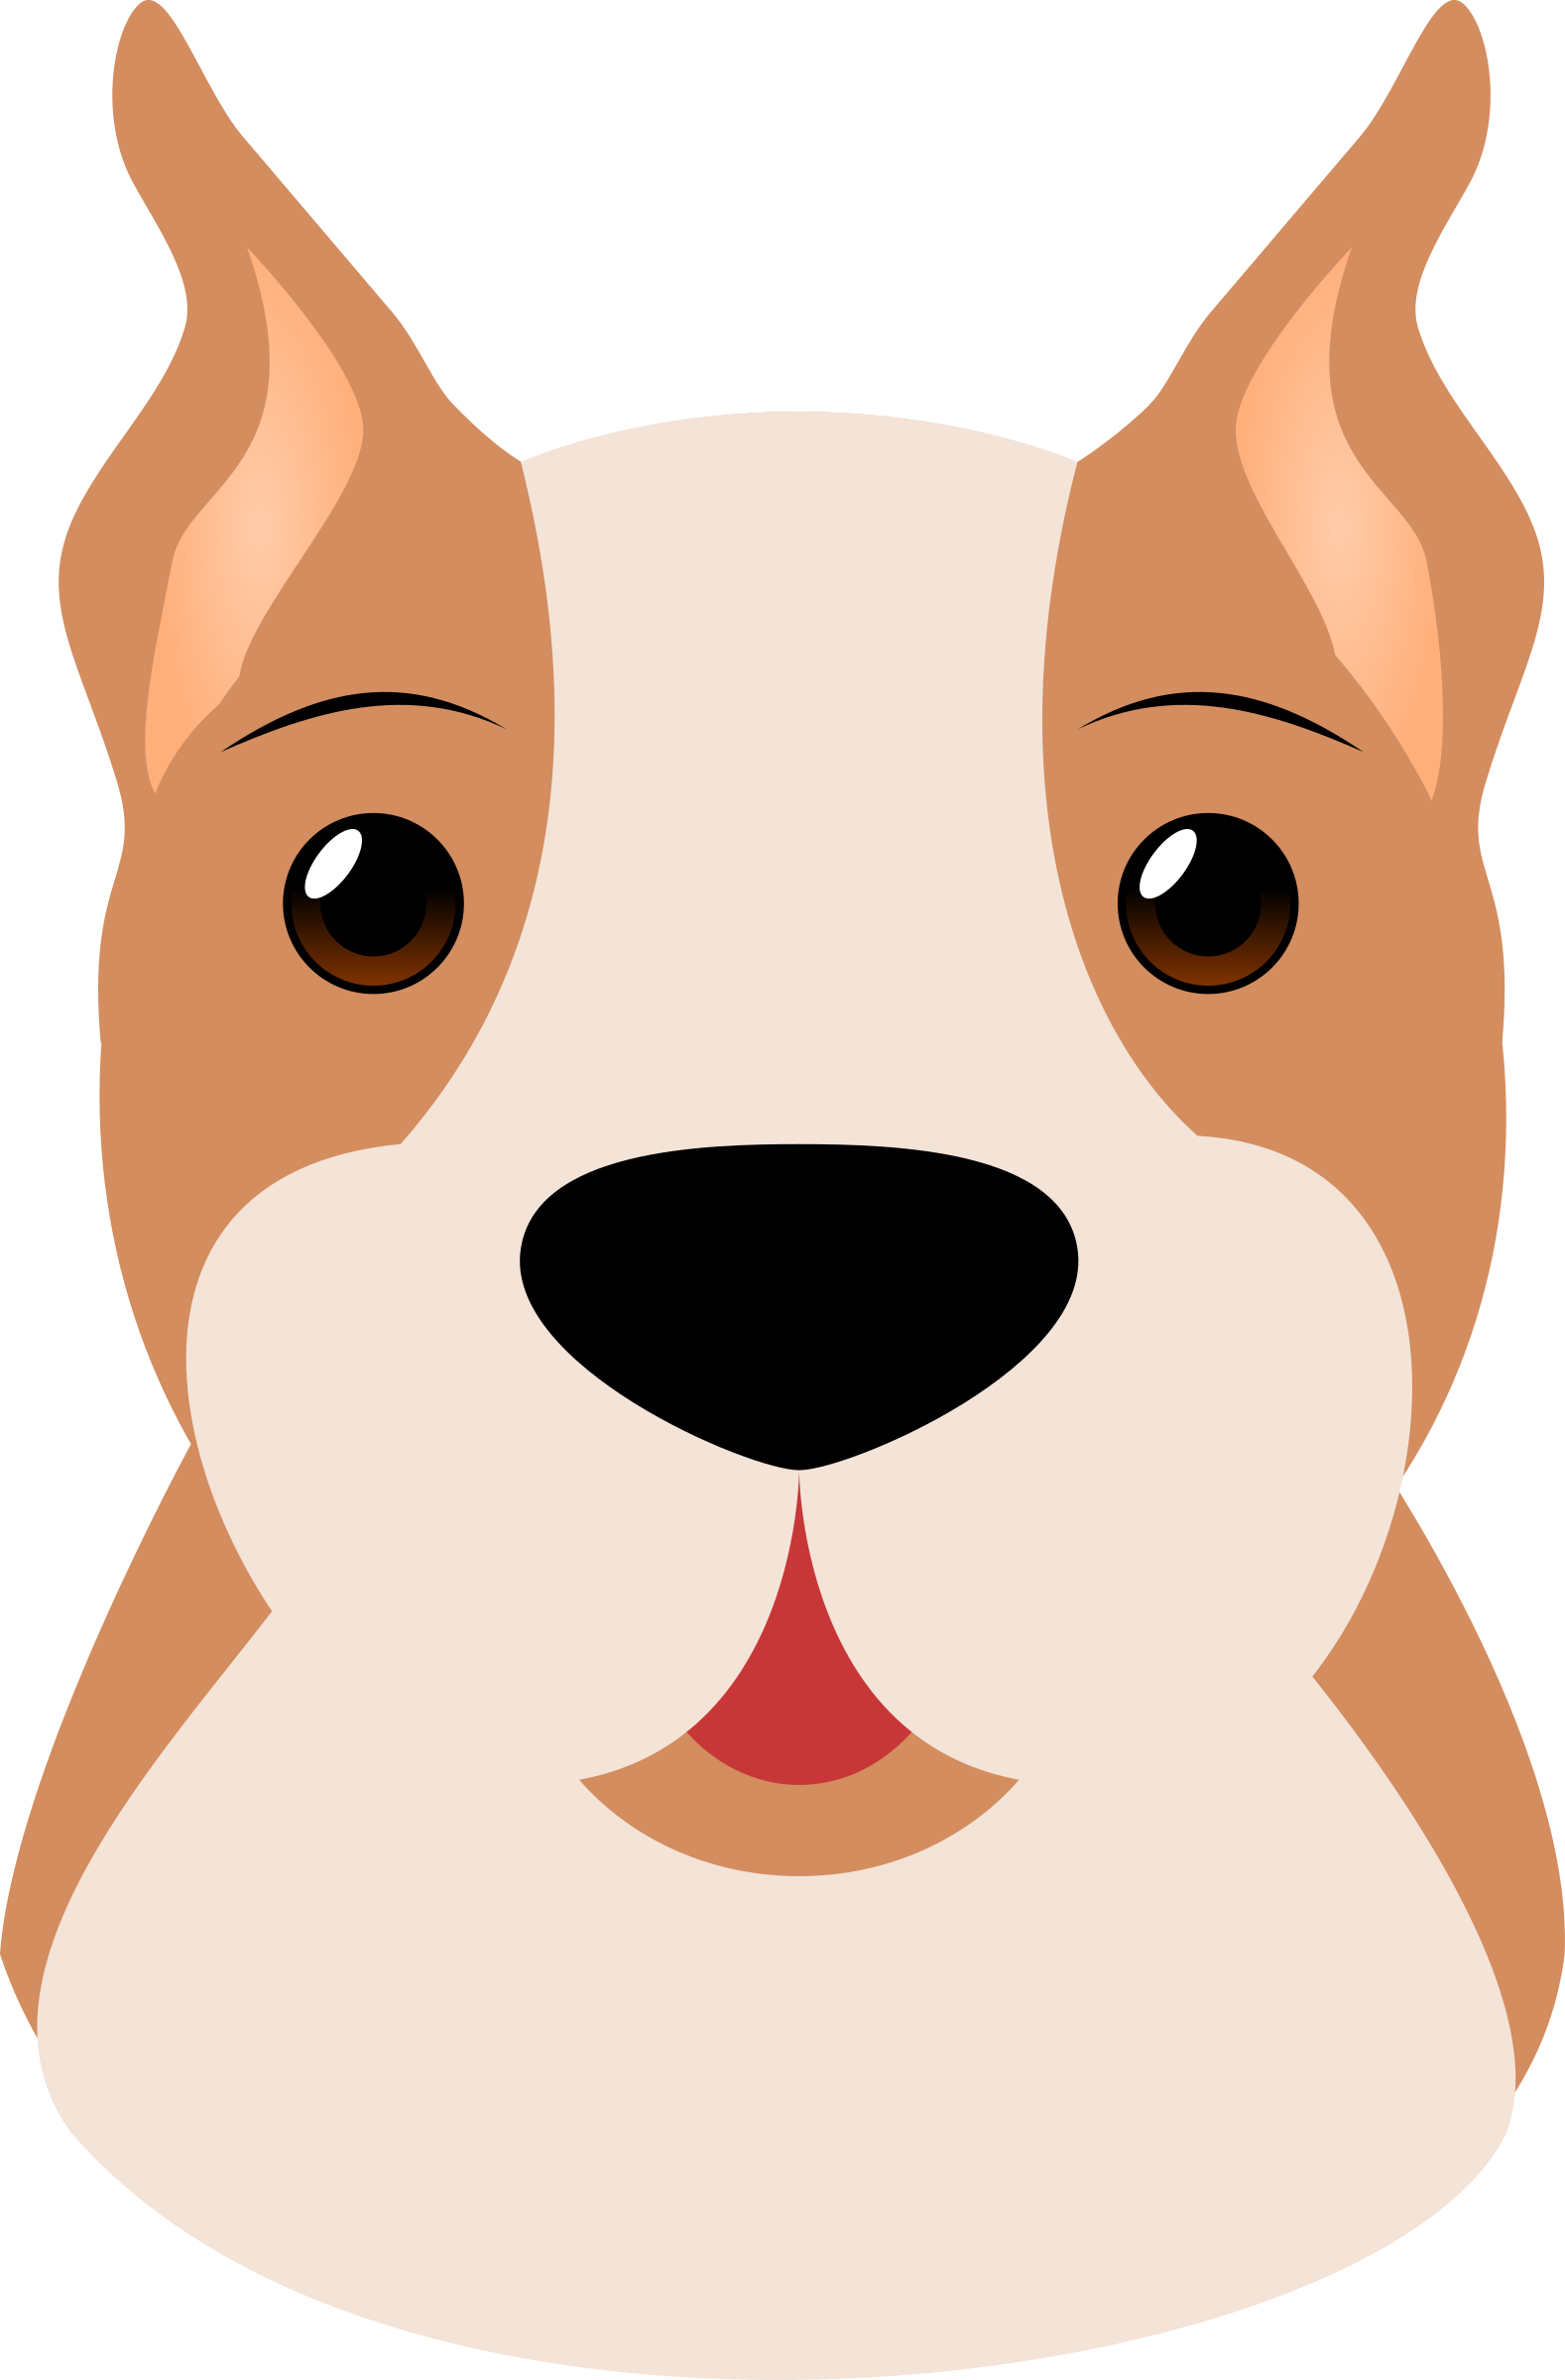 free vector dog clipart - photo #18